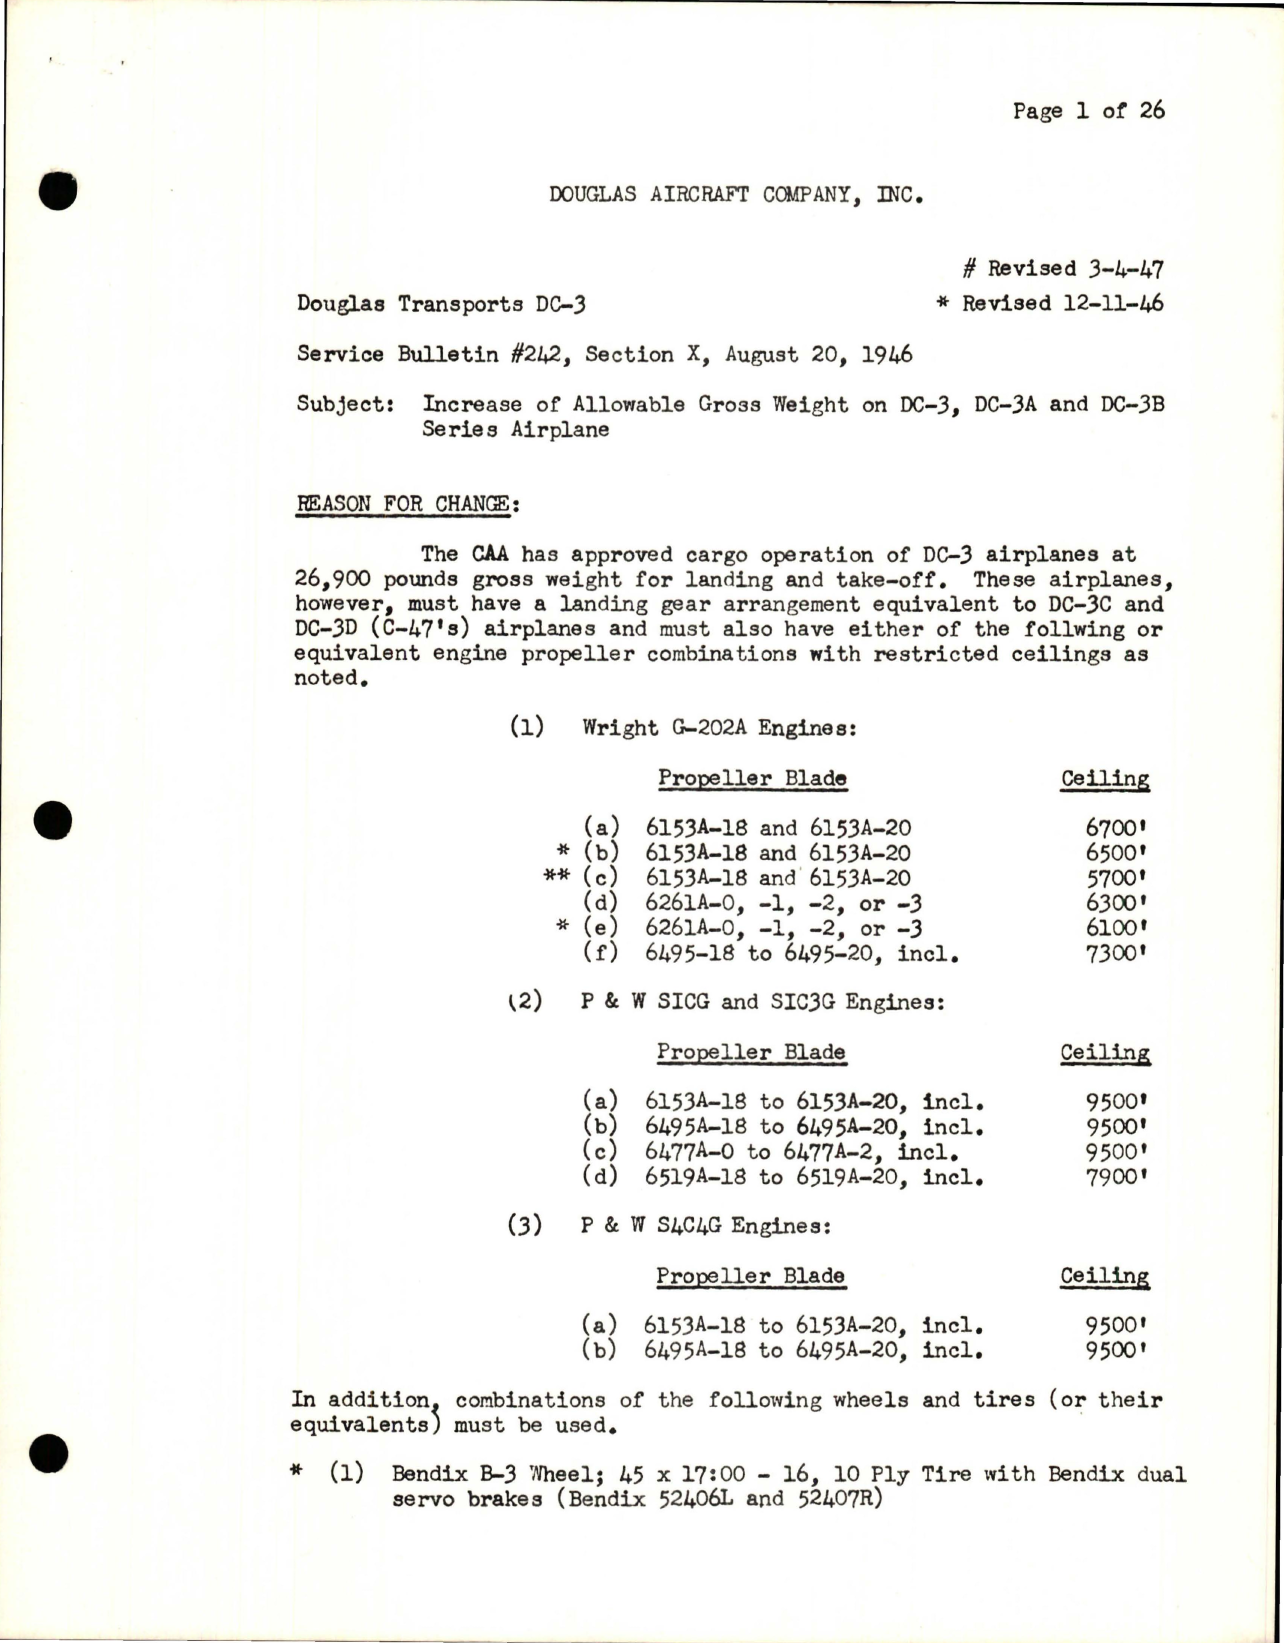 Sample page 1 from AirCorps Library document: Increase of Allowable Gross Weight on DC-3